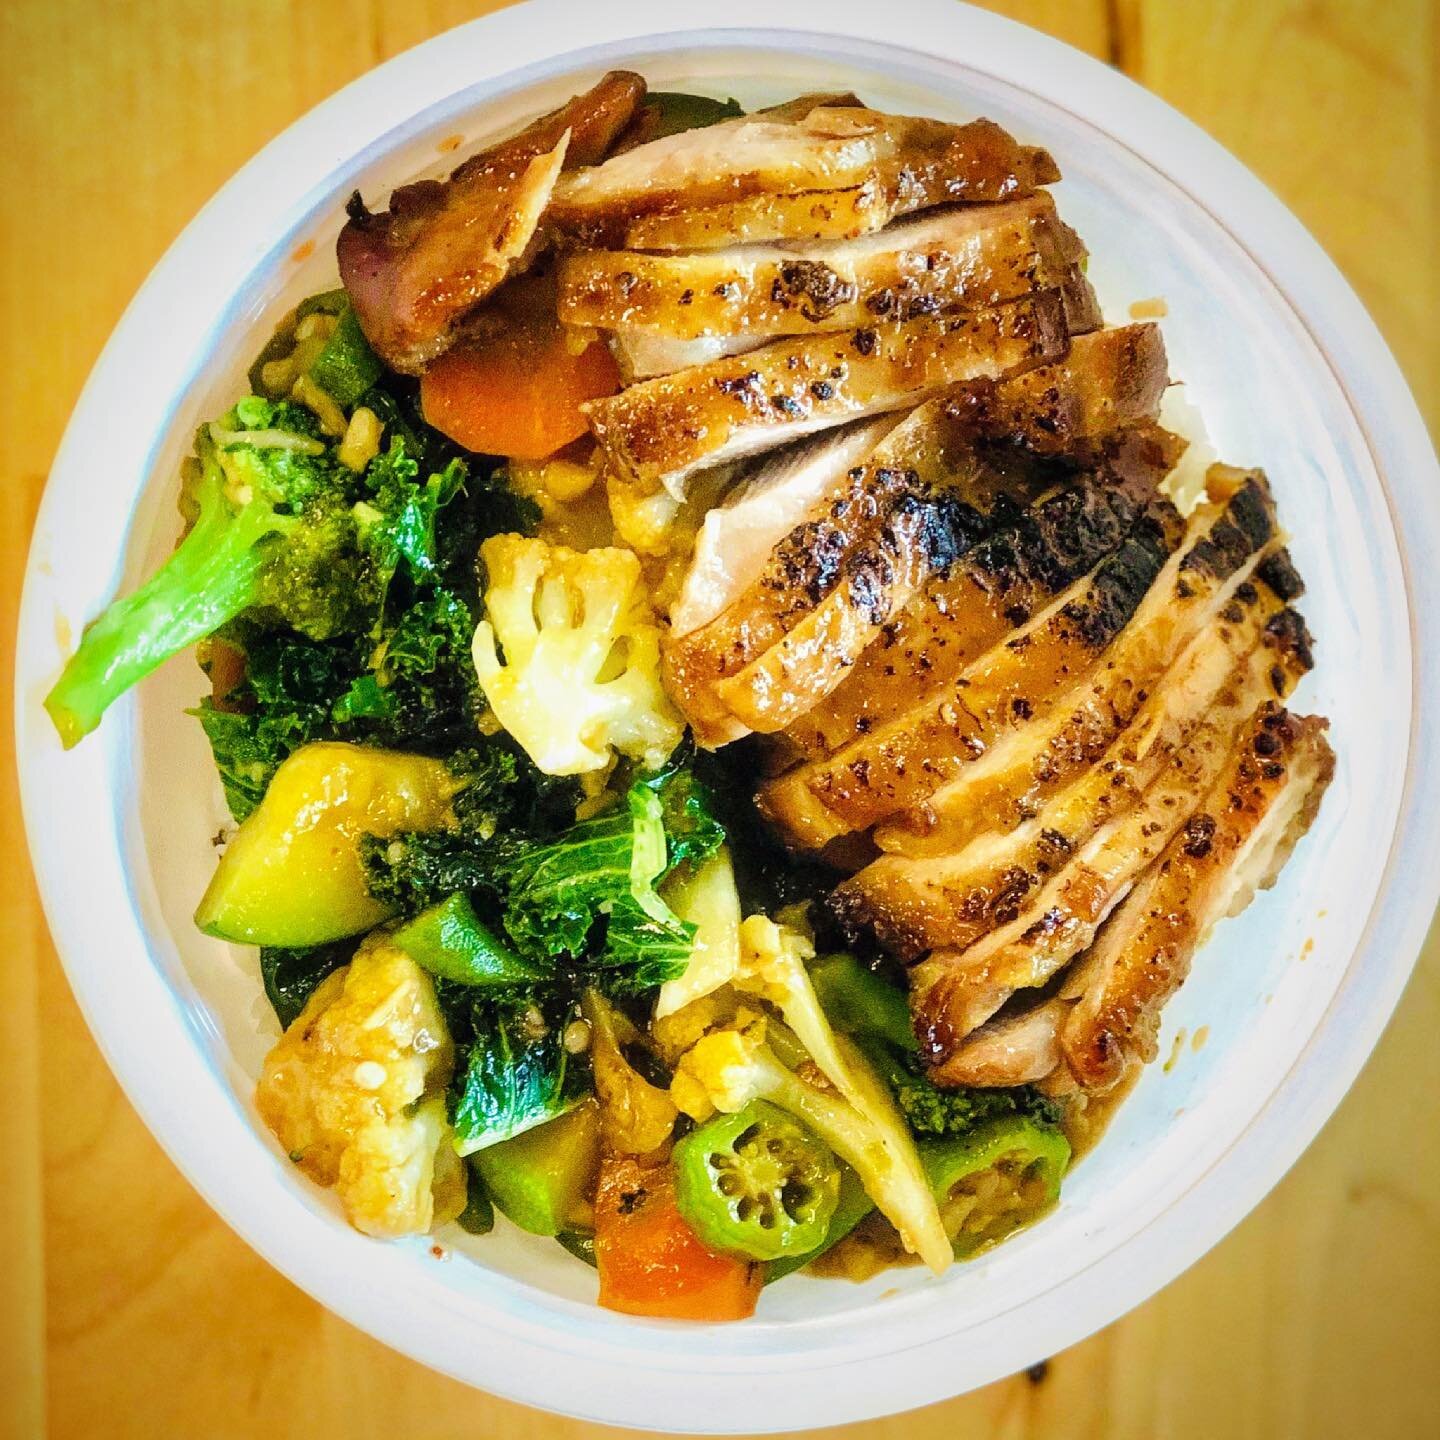 Did you know that we offer gluten-free options? Both our Stir-fried Market Vegetables and Honey Soy BBQ Chicken Bowls are gluten-friendly! This is our favorite mix and match bowl currently with a balance of veggies and protein. Order online, get it d